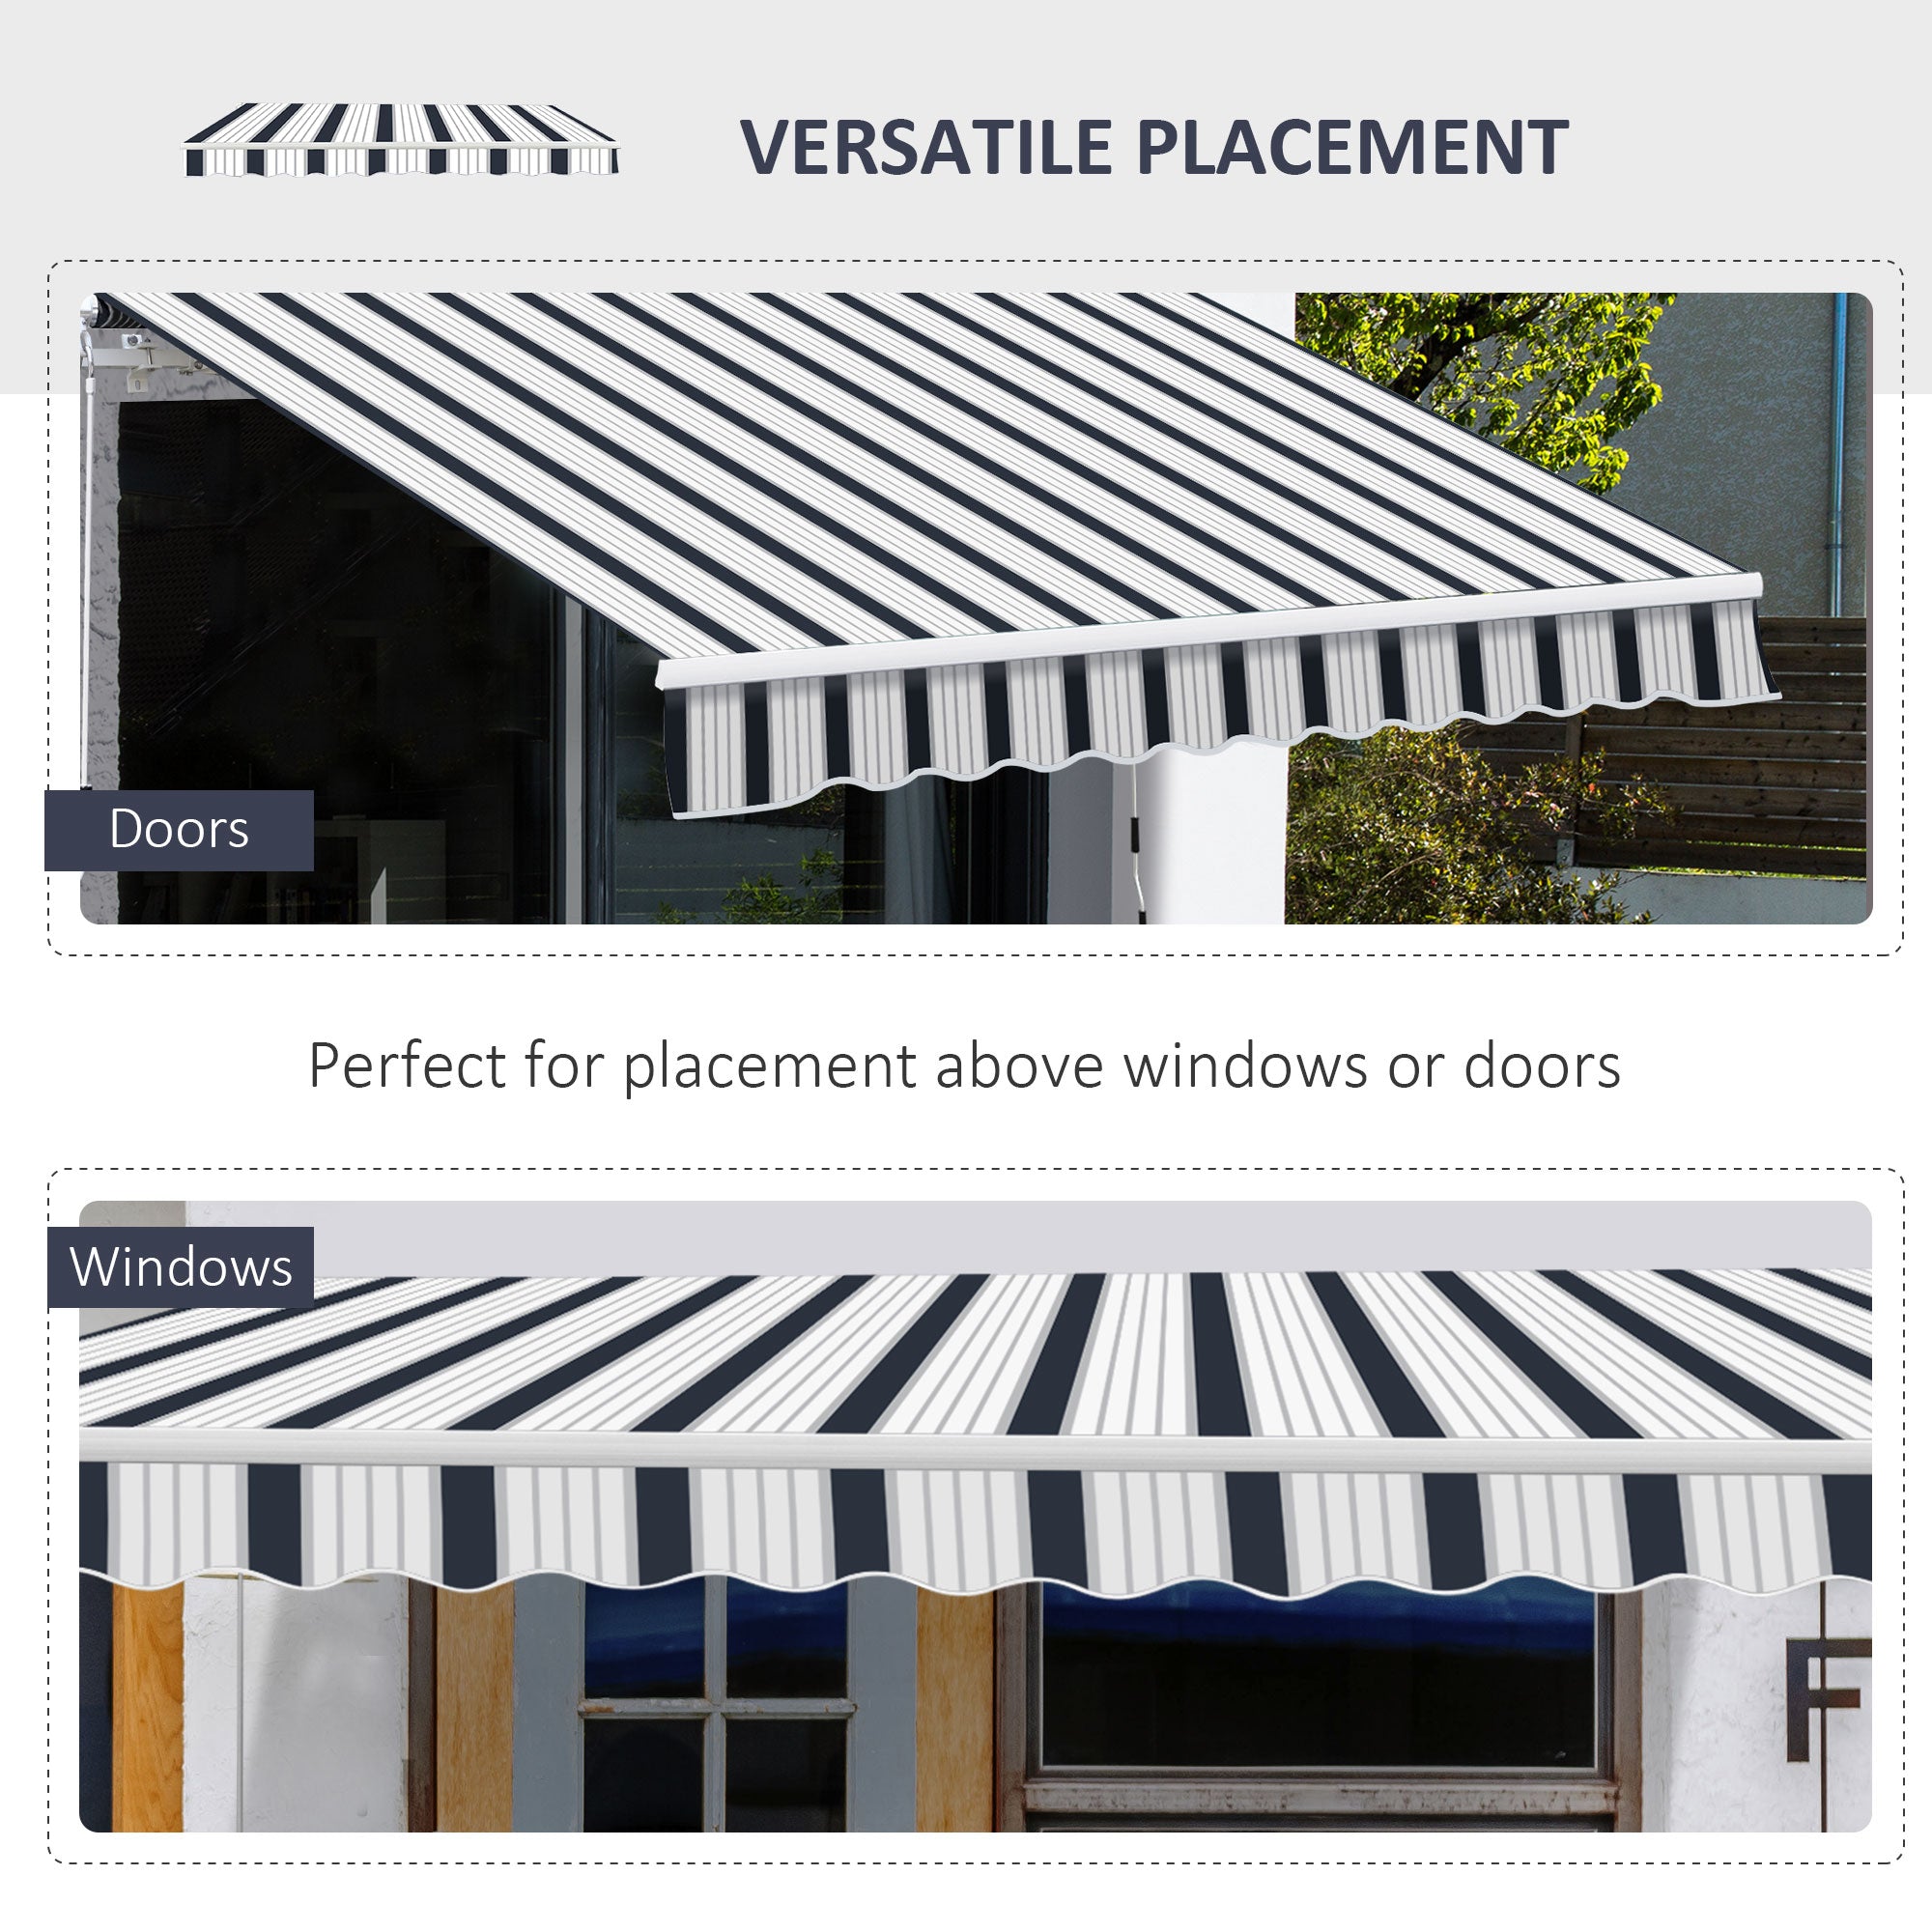 Outsunny 4m x 3(m) Garden Patio Manual Awning Canopy Aluminium Sun Shade Shelter Retractable Blue and White - Inspirely